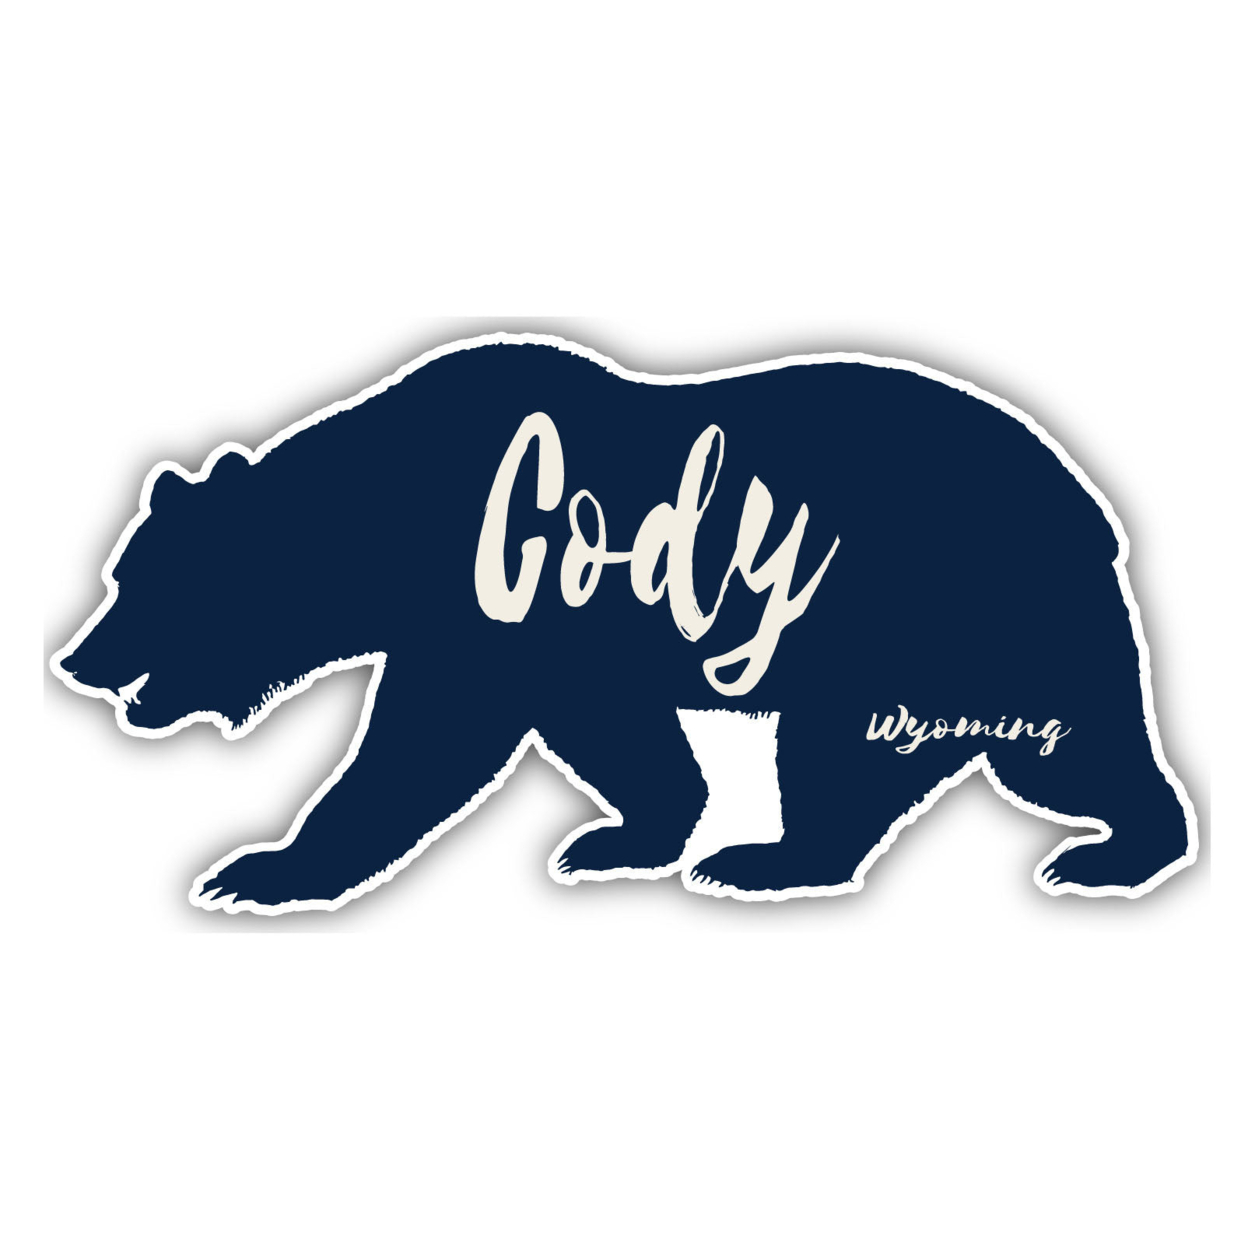 Cody Wyoming Souvenir Decorative Stickers (Choose Theme And Size) - 4-Pack, 2-Inch, Bear